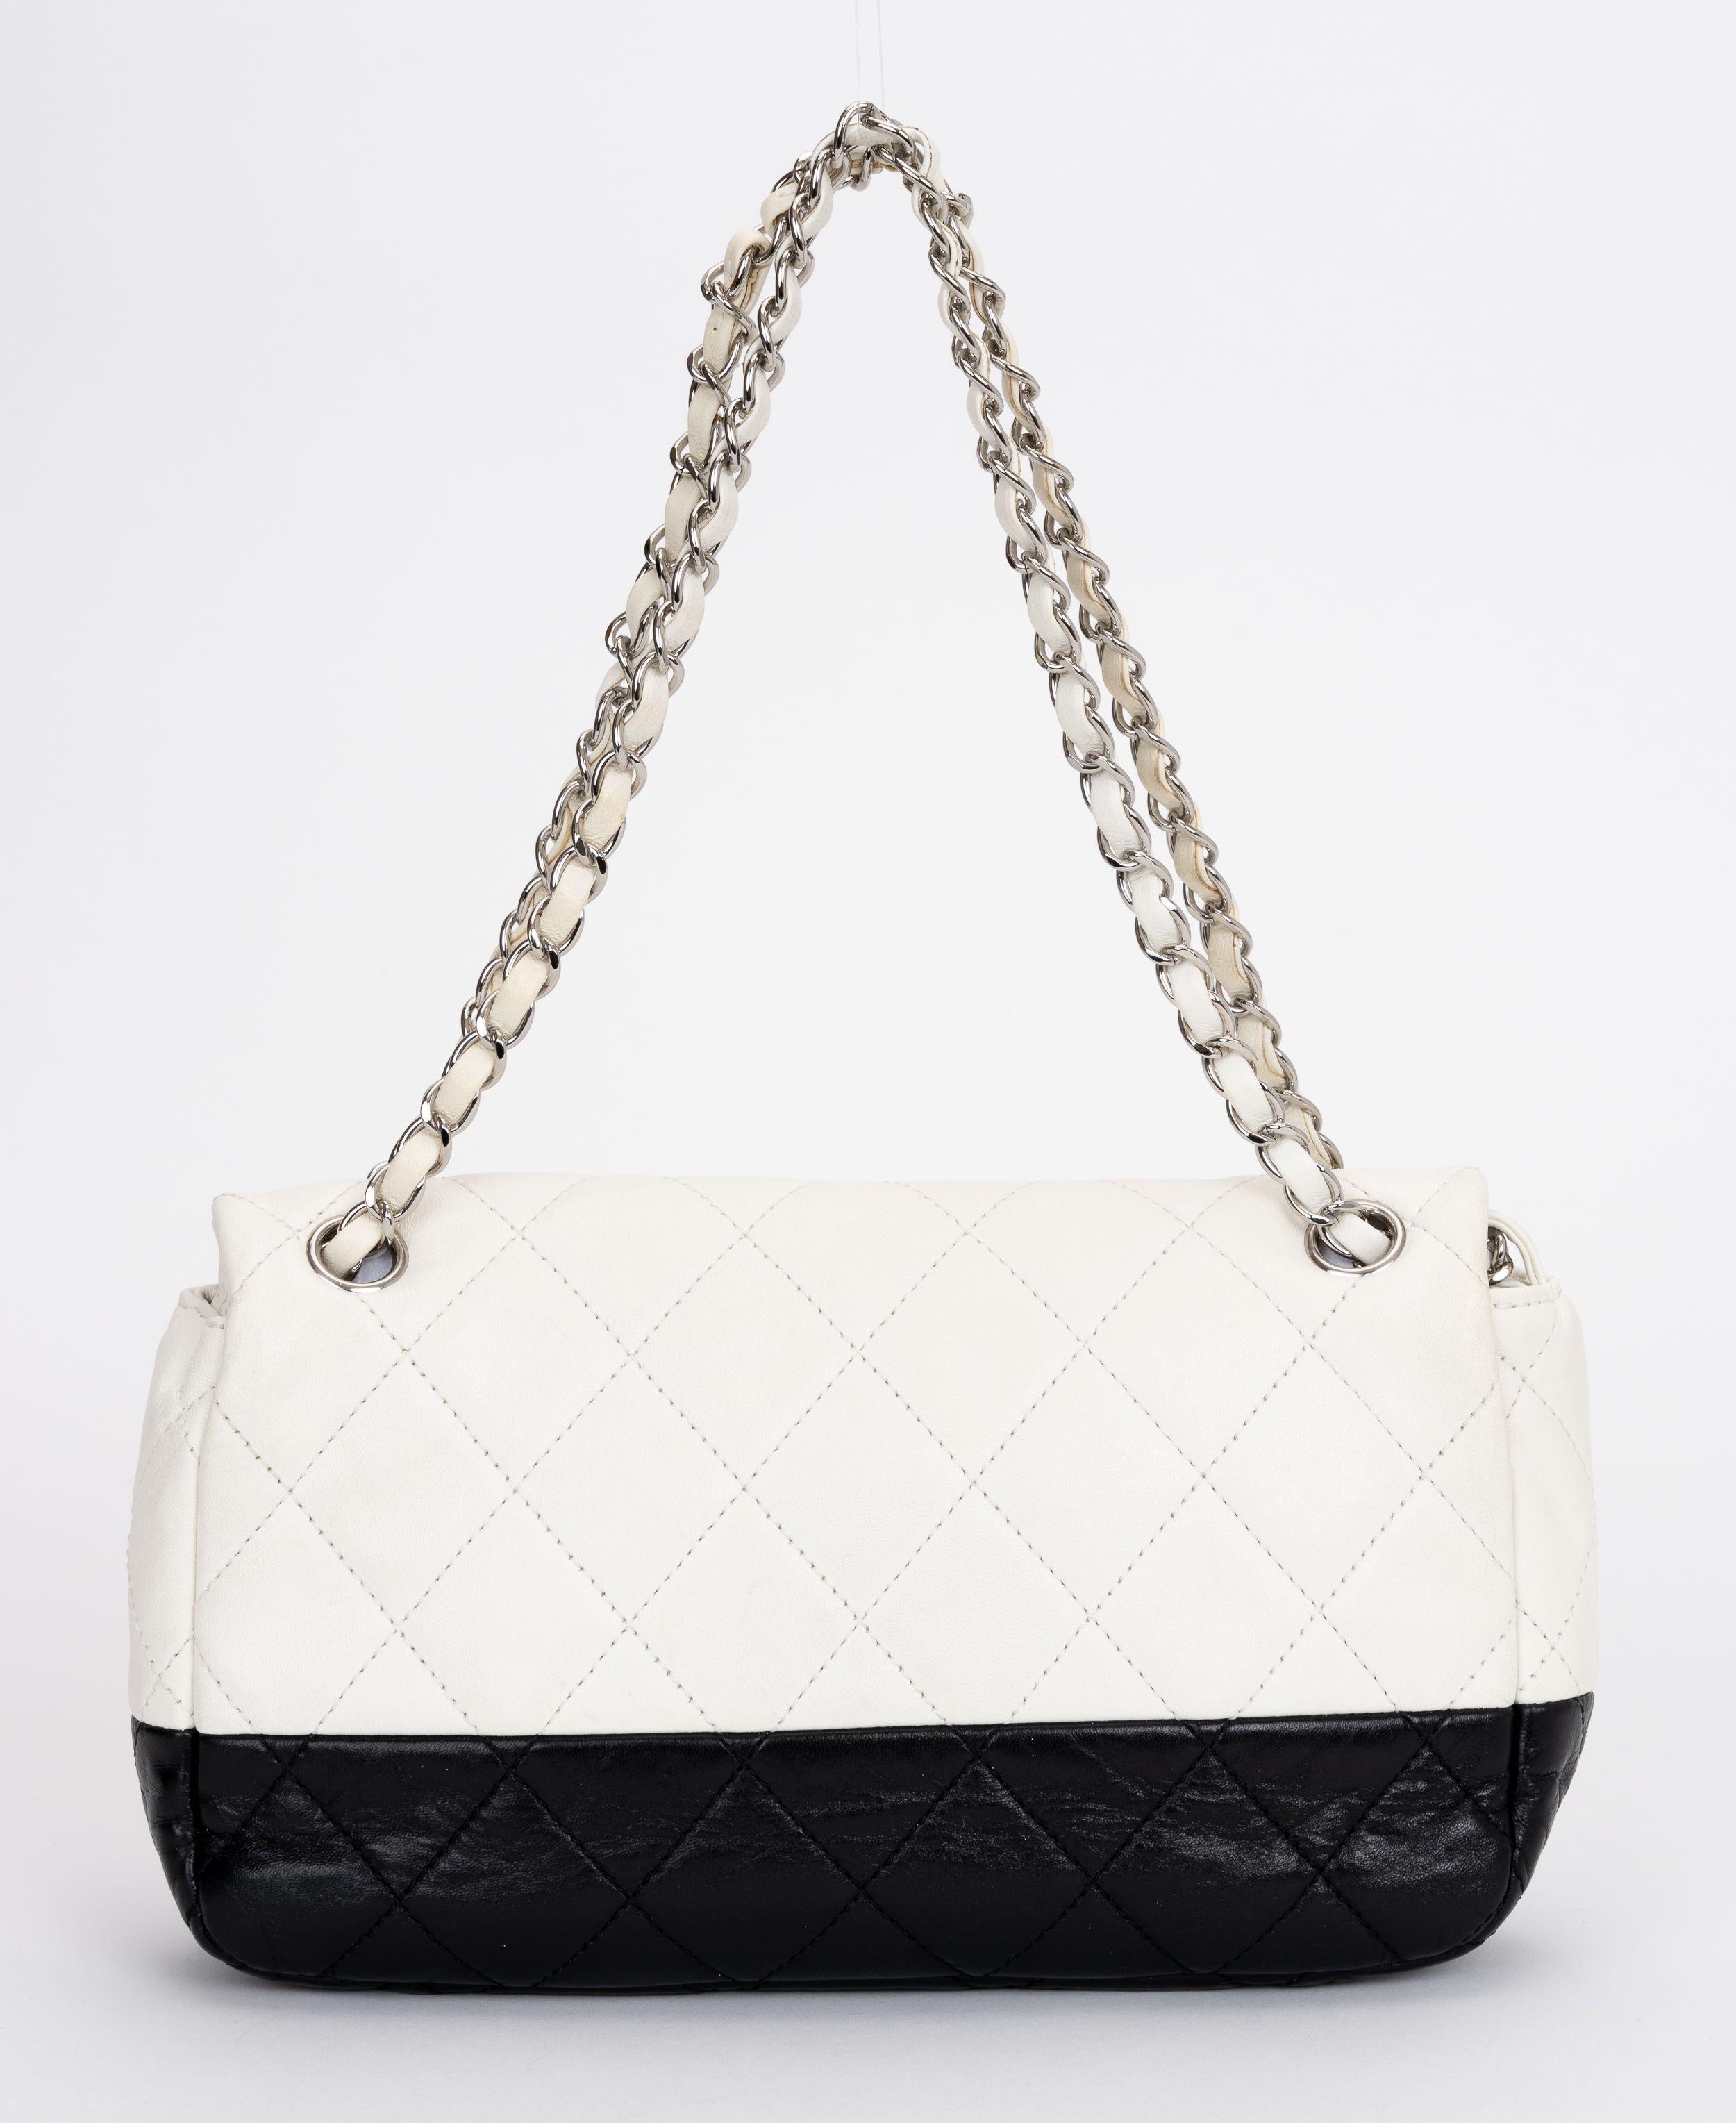 Chanel Black/White Leather Crossbody Bag In Excellent Condition For Sale In West Hollywood, CA